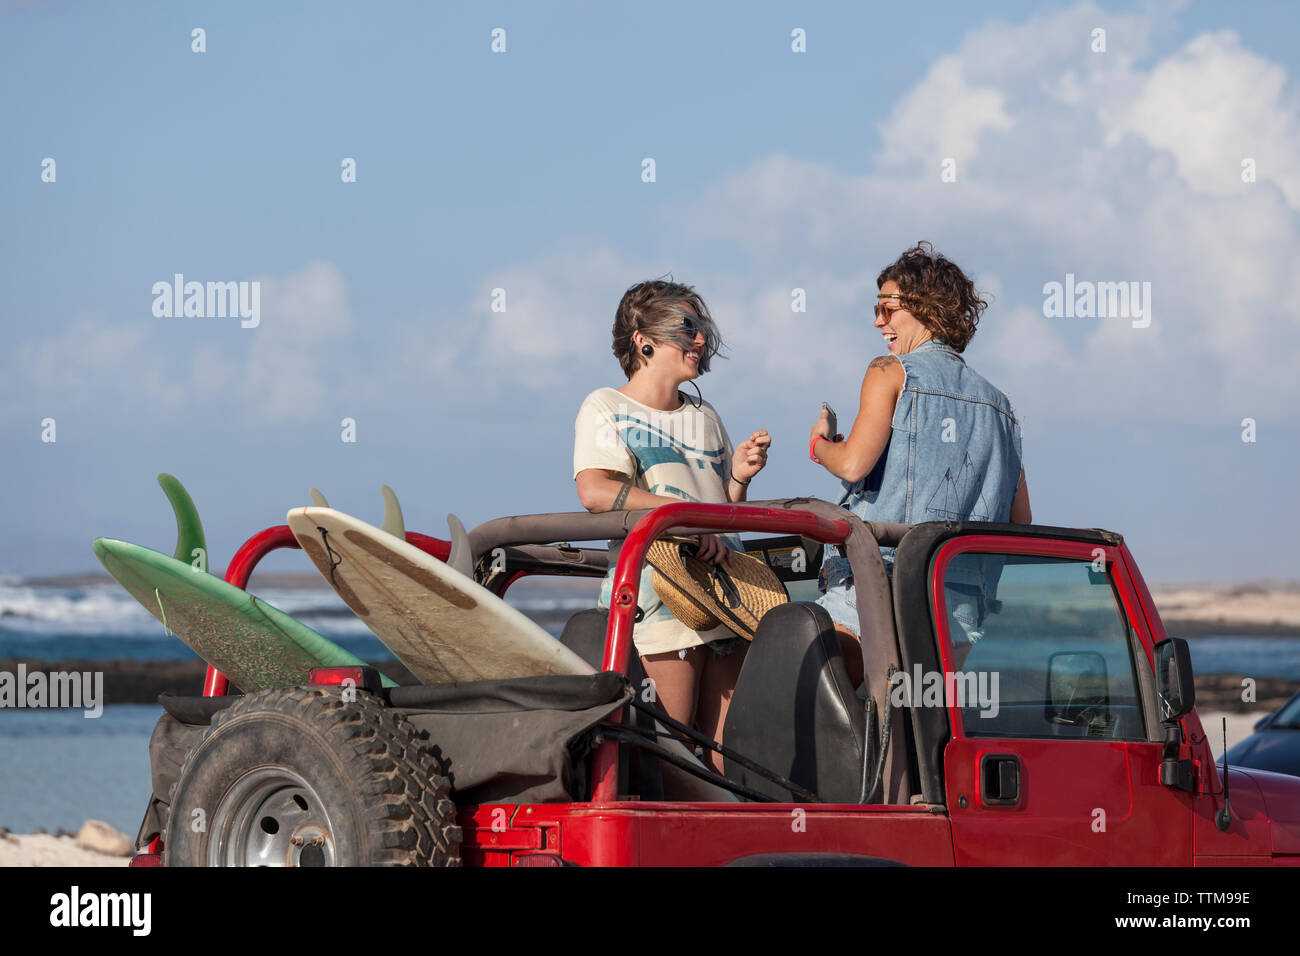 Two surfer girls standing one the seats of cabrio 4x4 car laughing Stock Photo